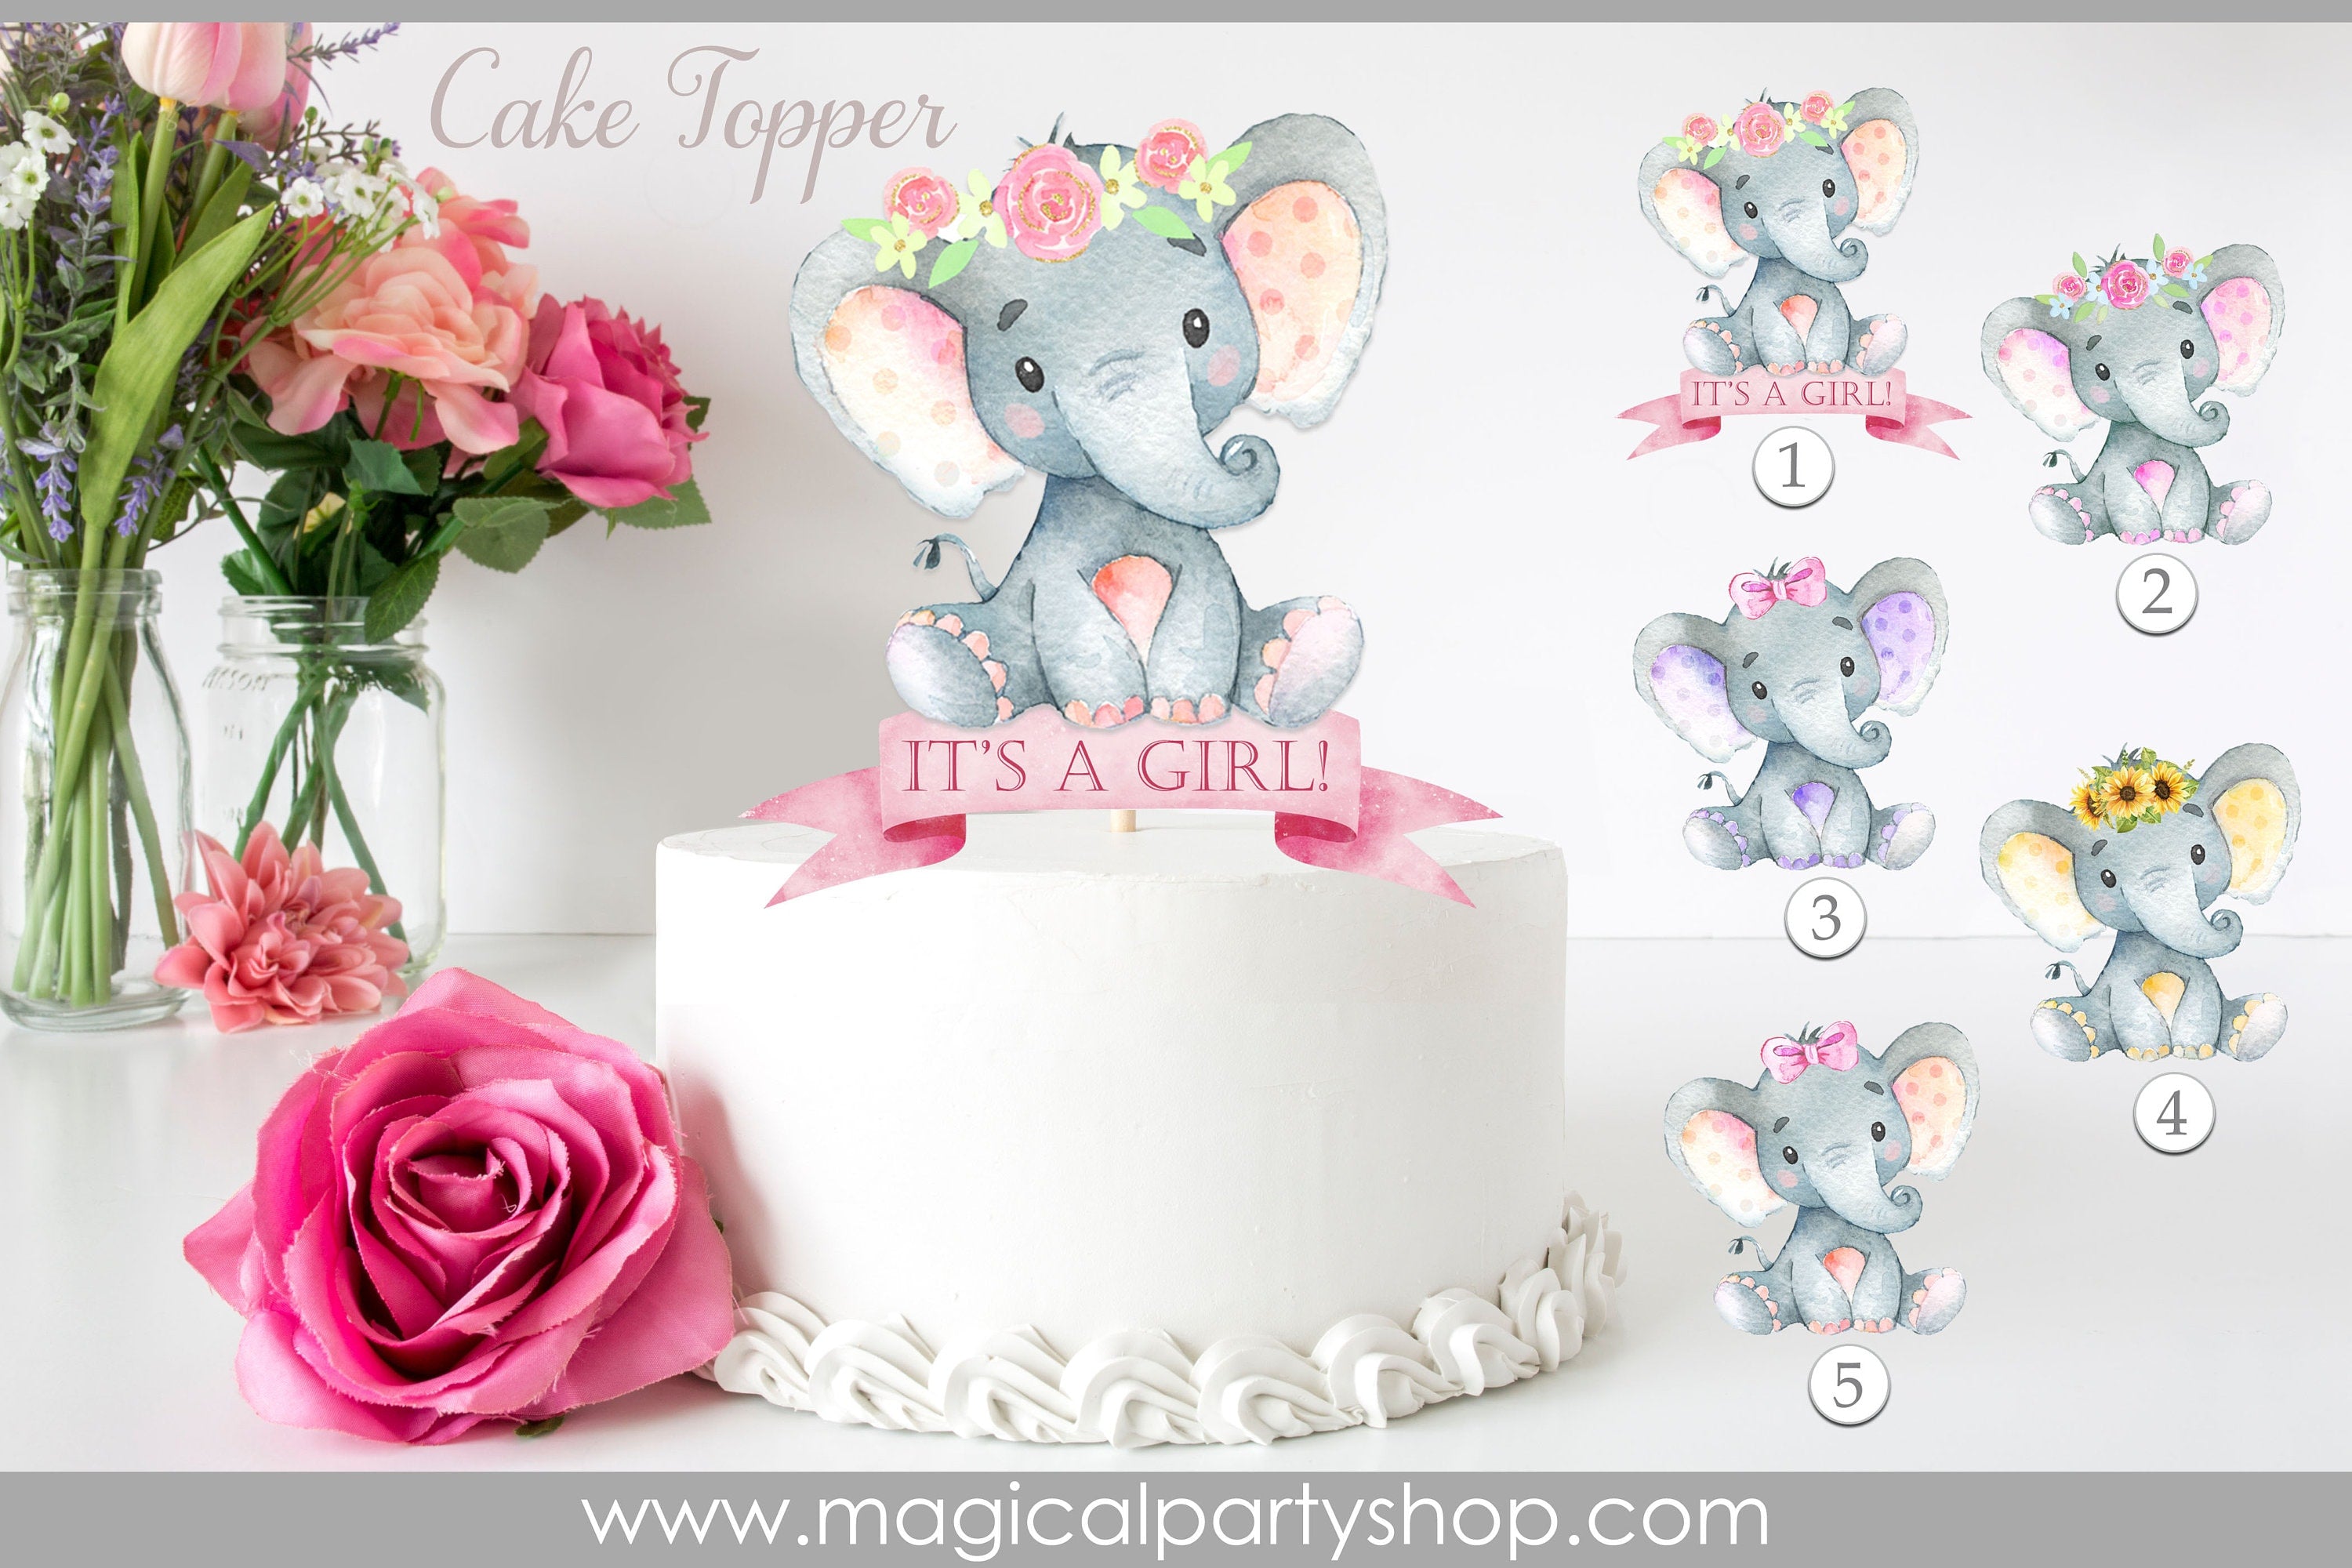 Party Cake Topper Cake Topper For Birthday Baby Shower Party Cake